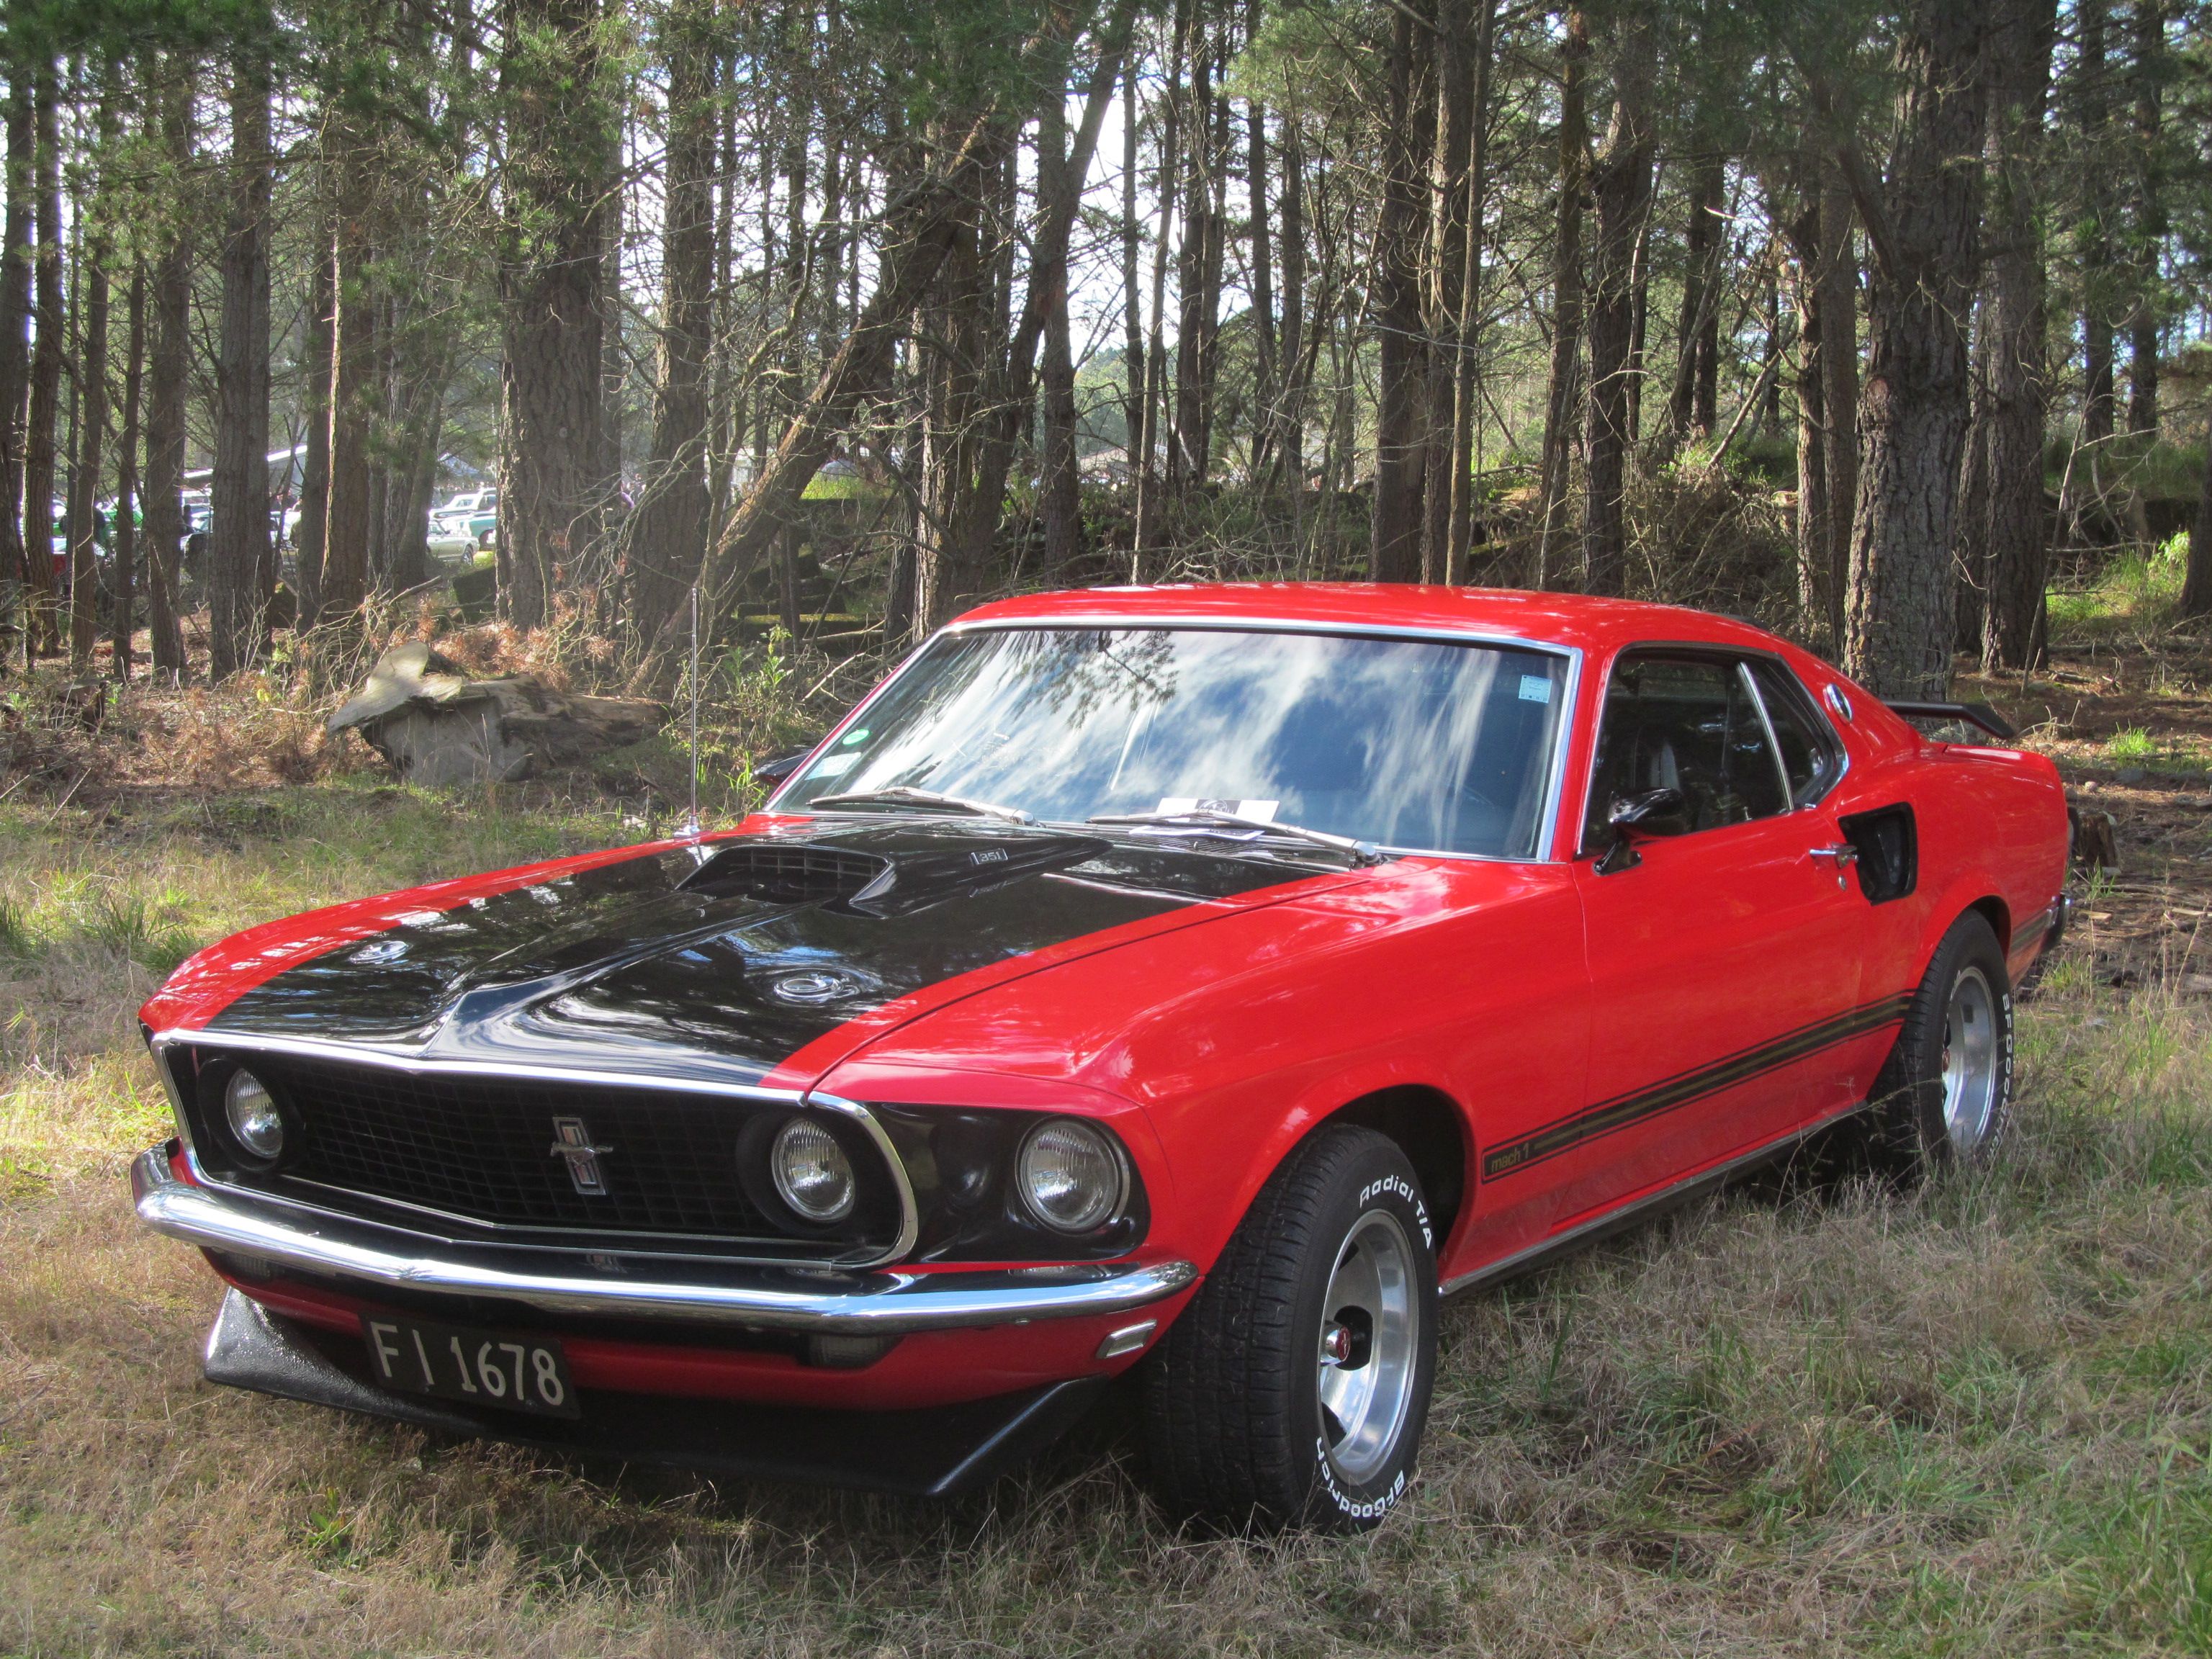 1969 Ford Mustang Mach 1: A muscle car for all generations.